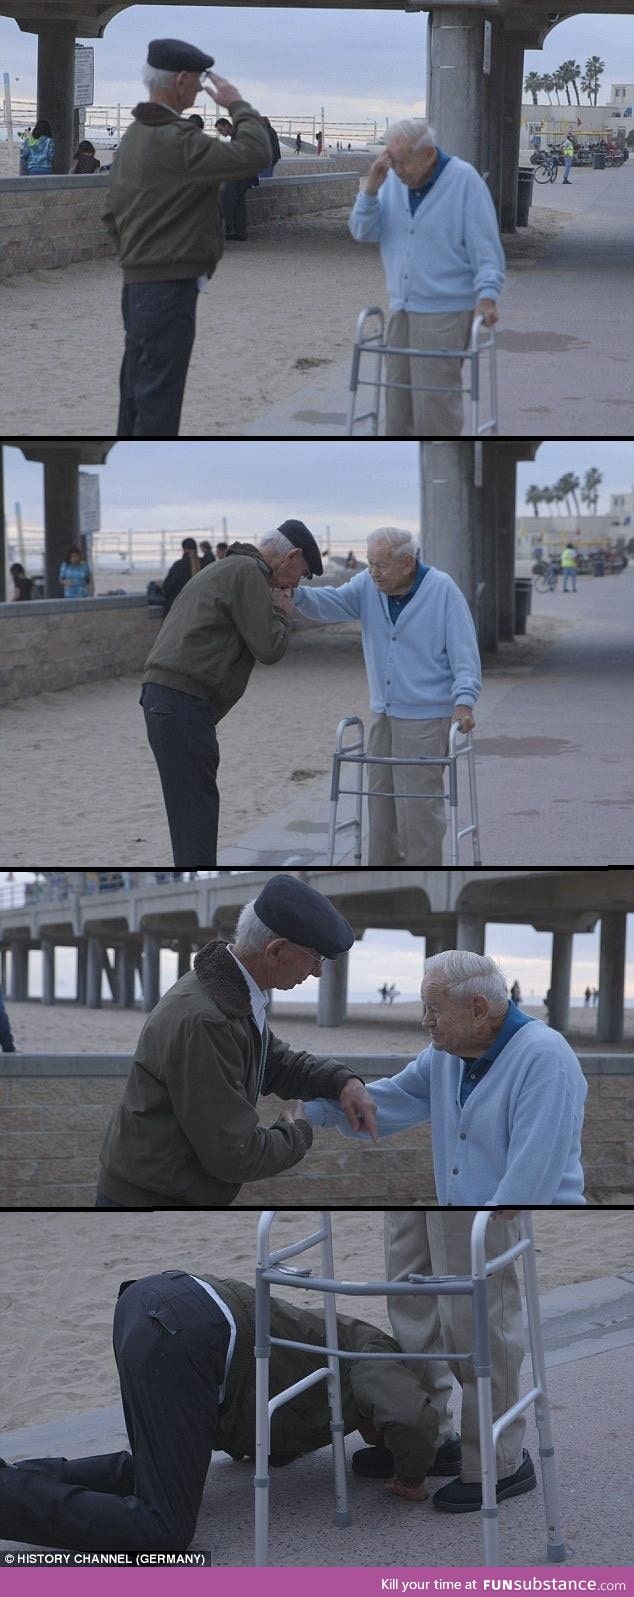 This Holocaust Survivor salutes a US Soldier who liberated him from a Concentration Camp.